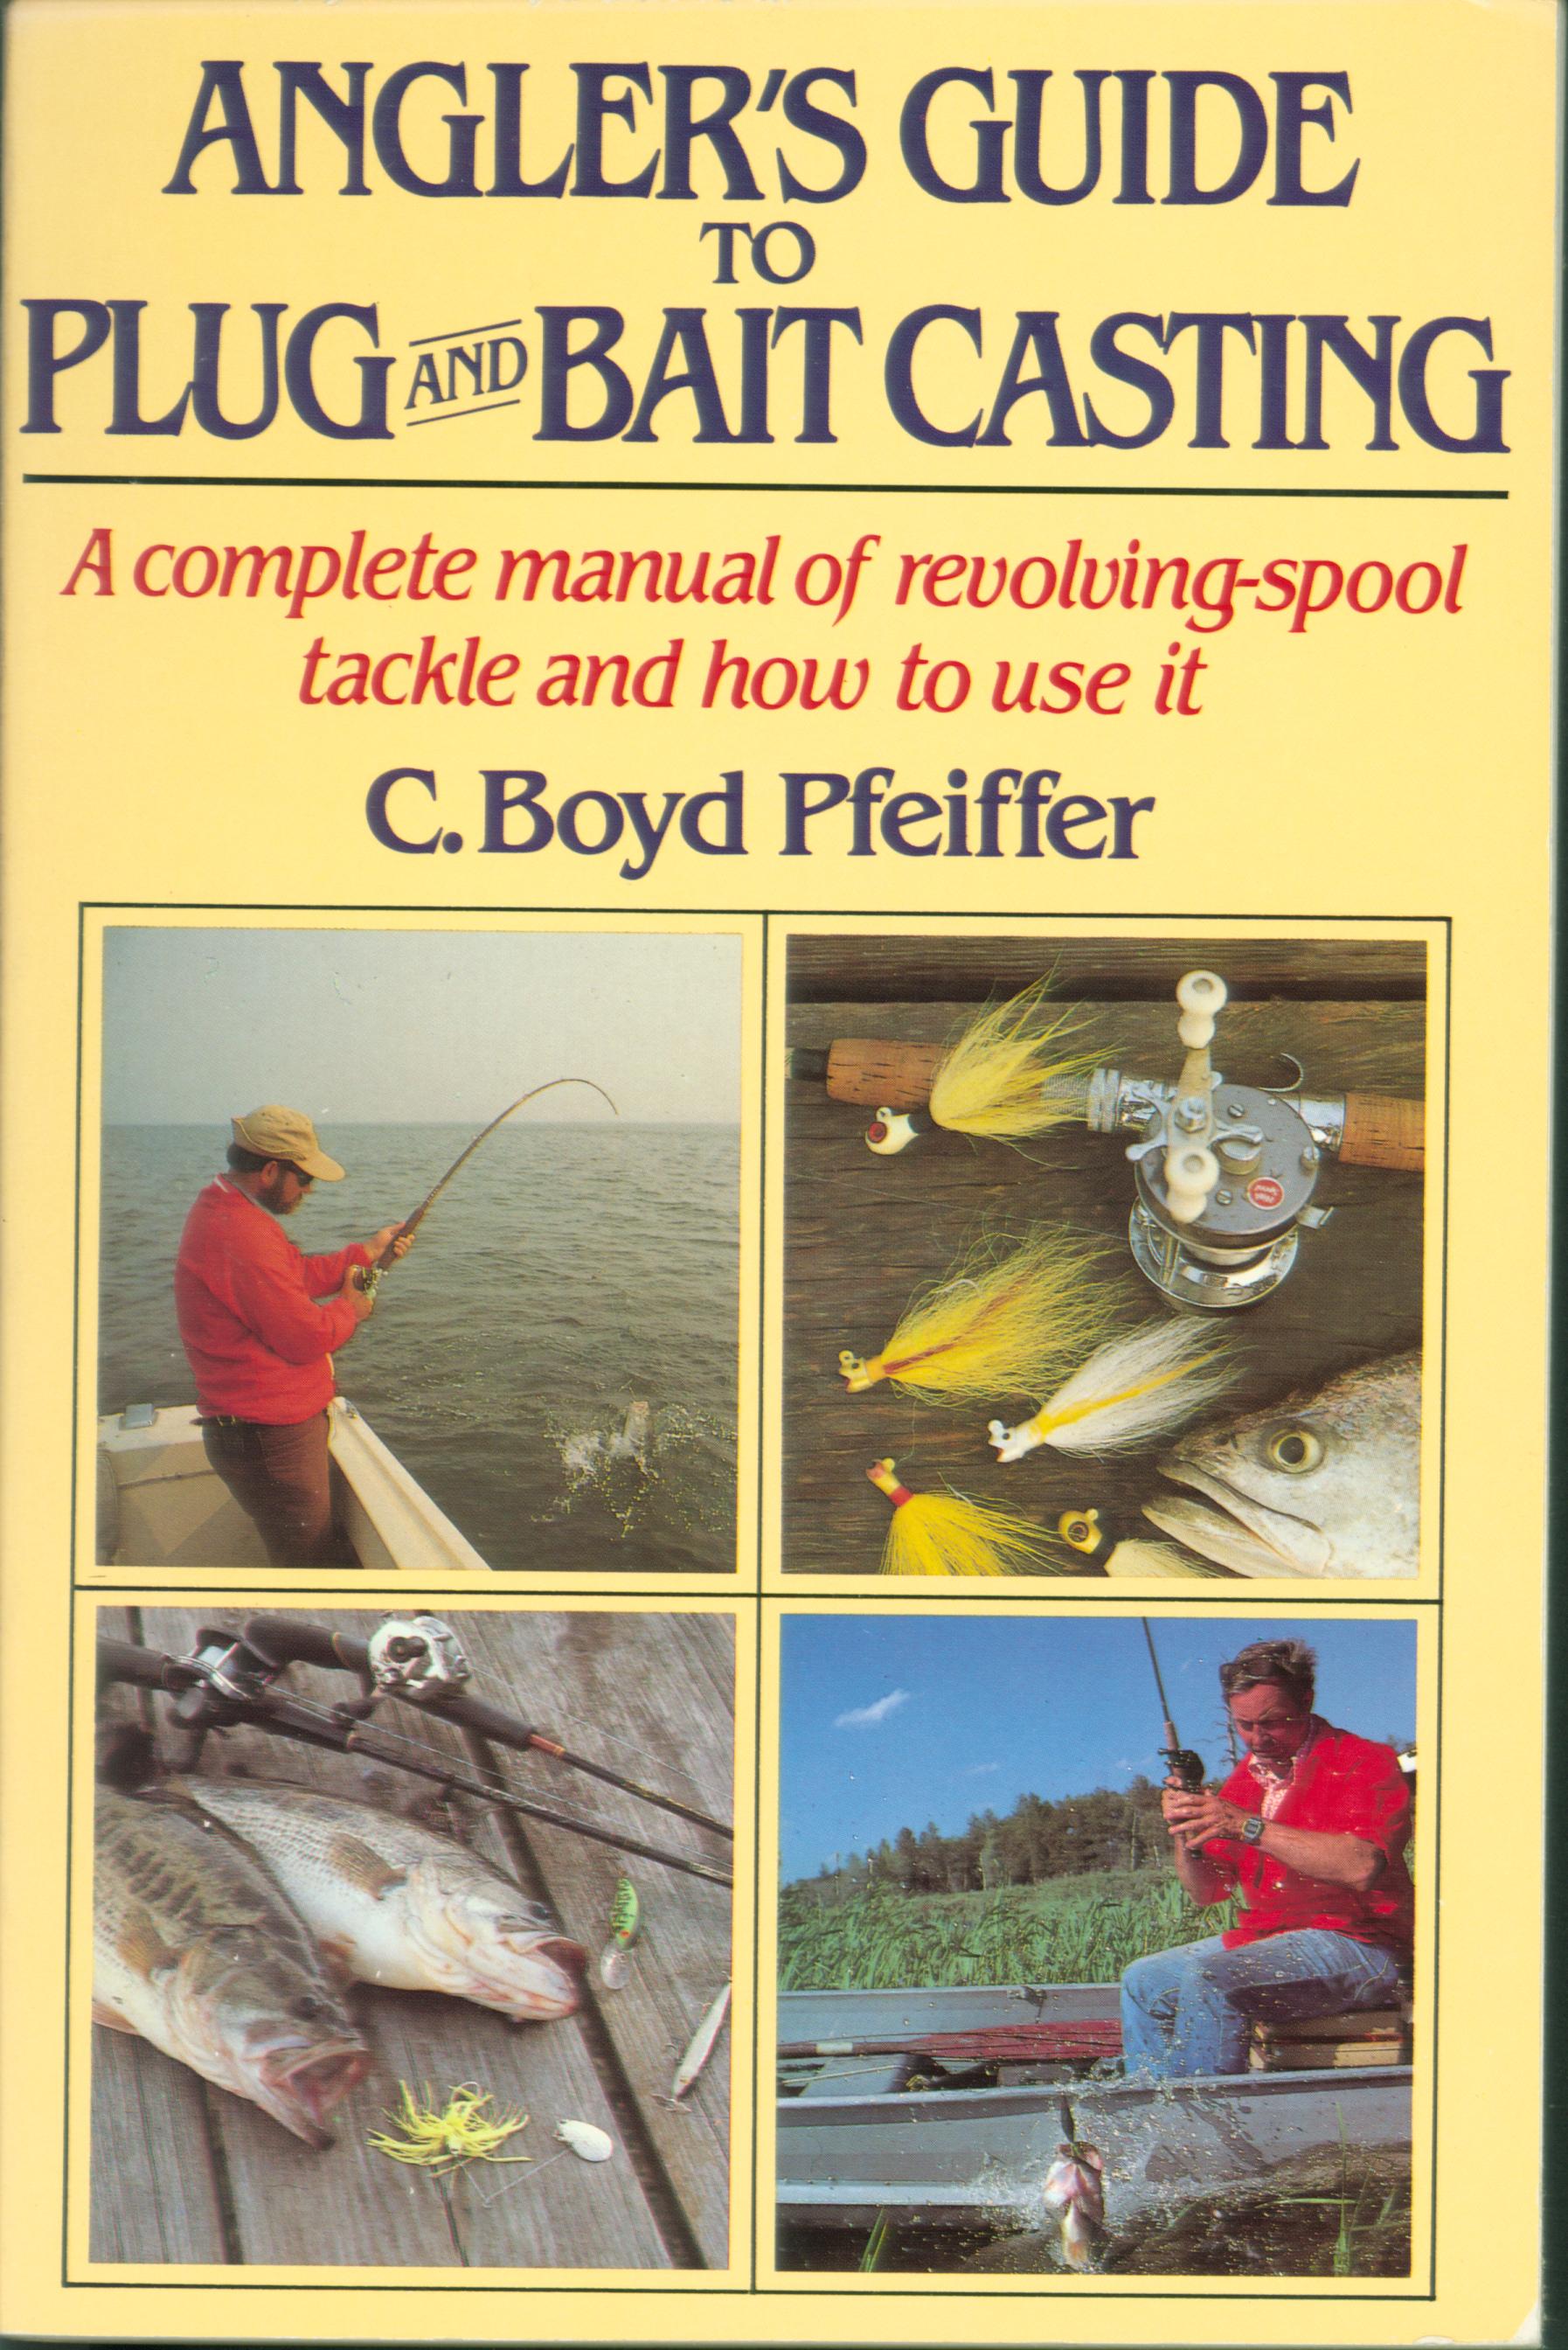 ANGLER'S GUIDE TO PLUG AND BAIT CASTING: a complete manual of revolving--spool tackle and how to use it. 